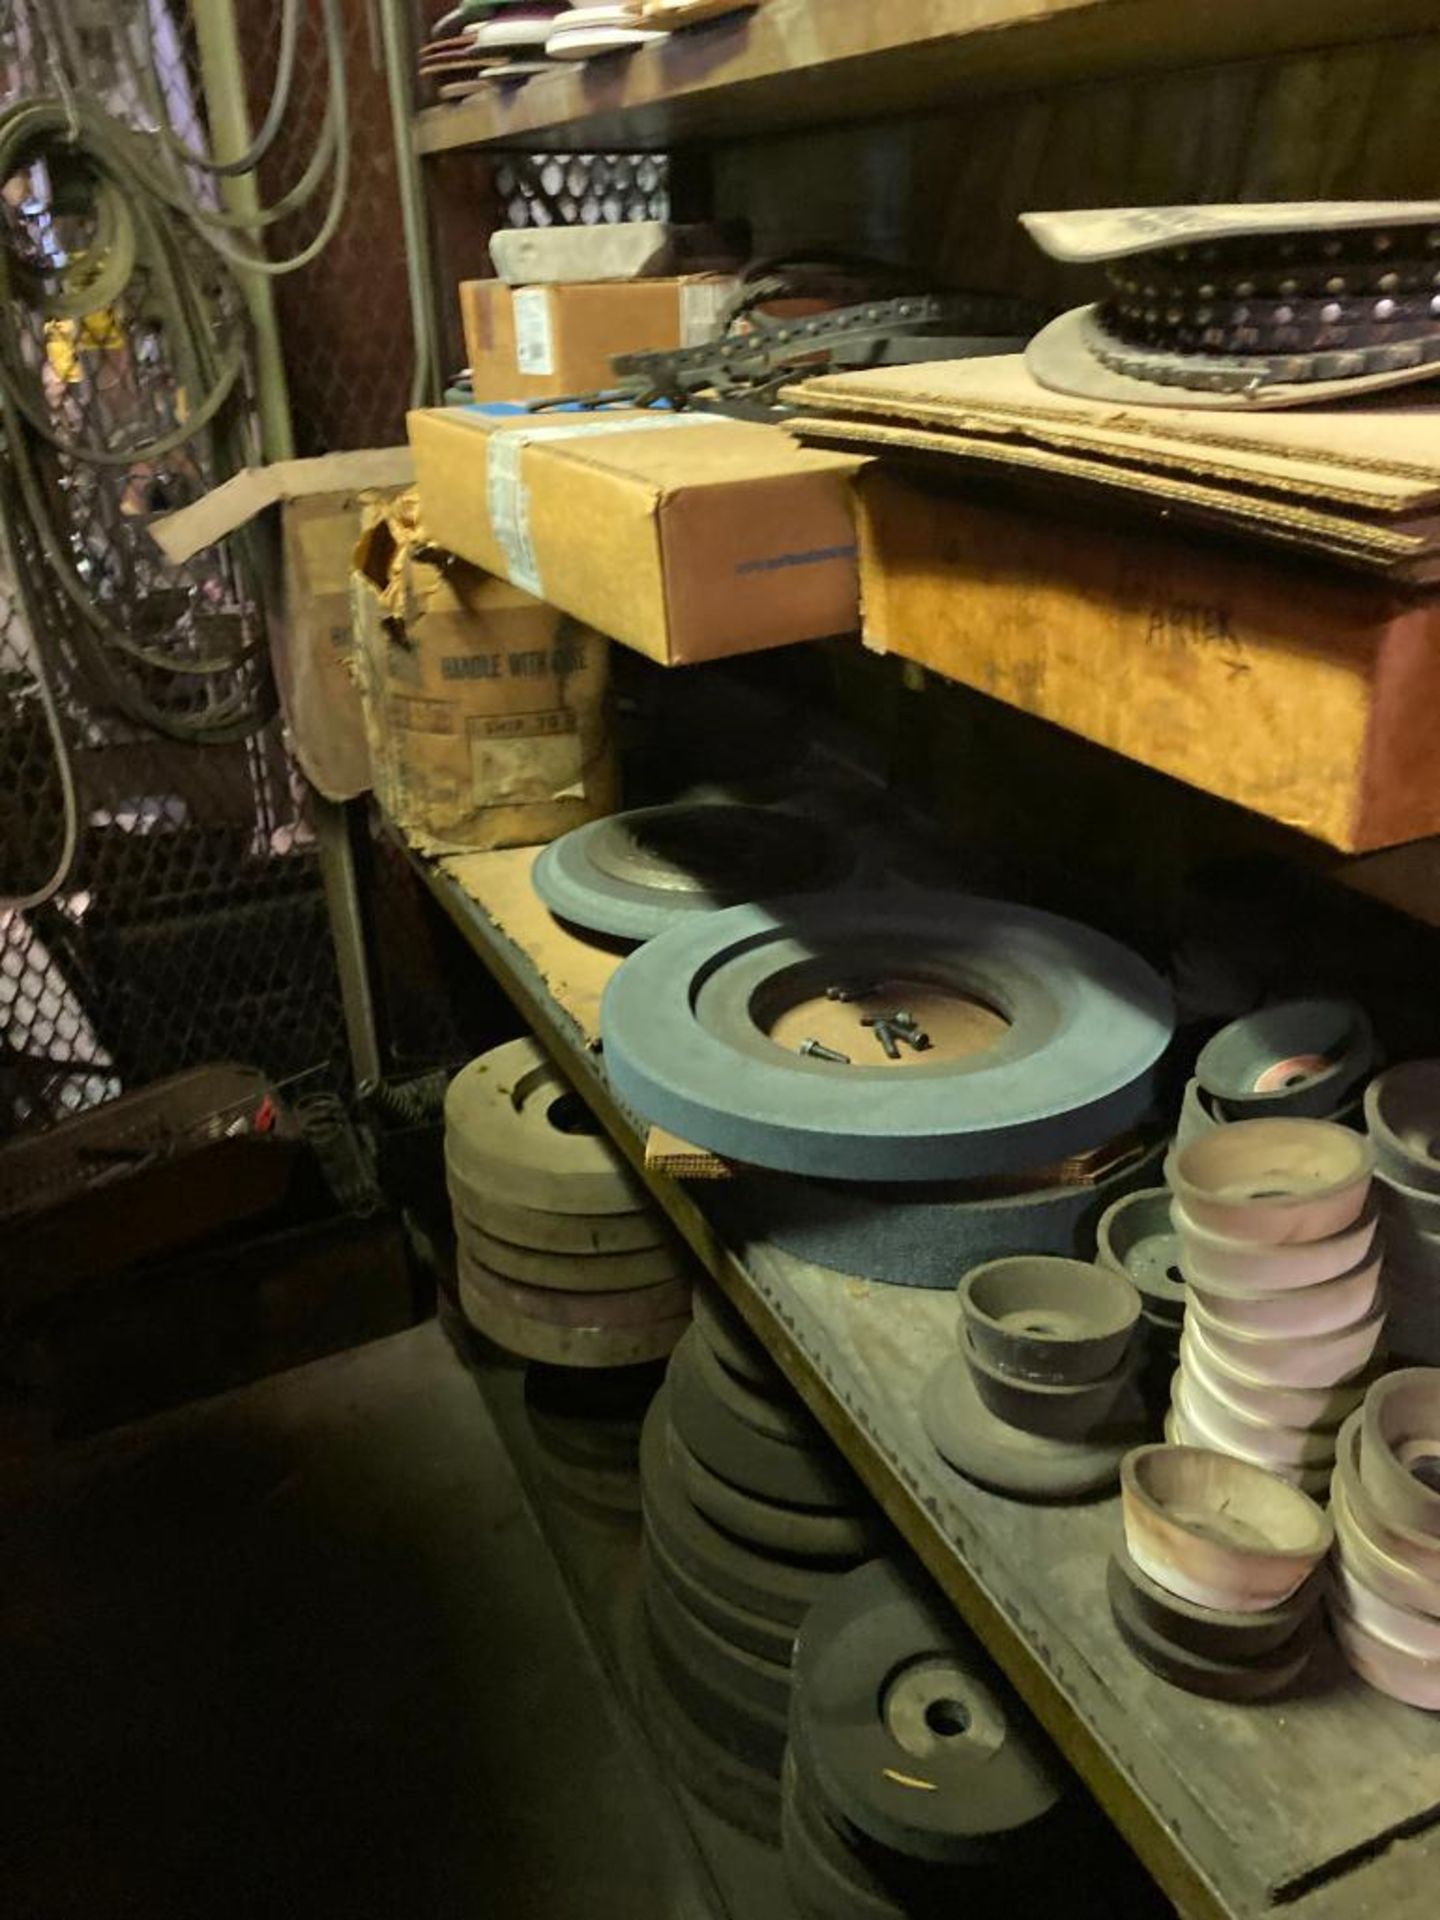 ASSORTED GRINDING WHEELS, ASSORTED BORING BARS IN GRAY CABINET, ASSORTED SANDVIK CARBIDE CUTTERS - Image 3 of 4